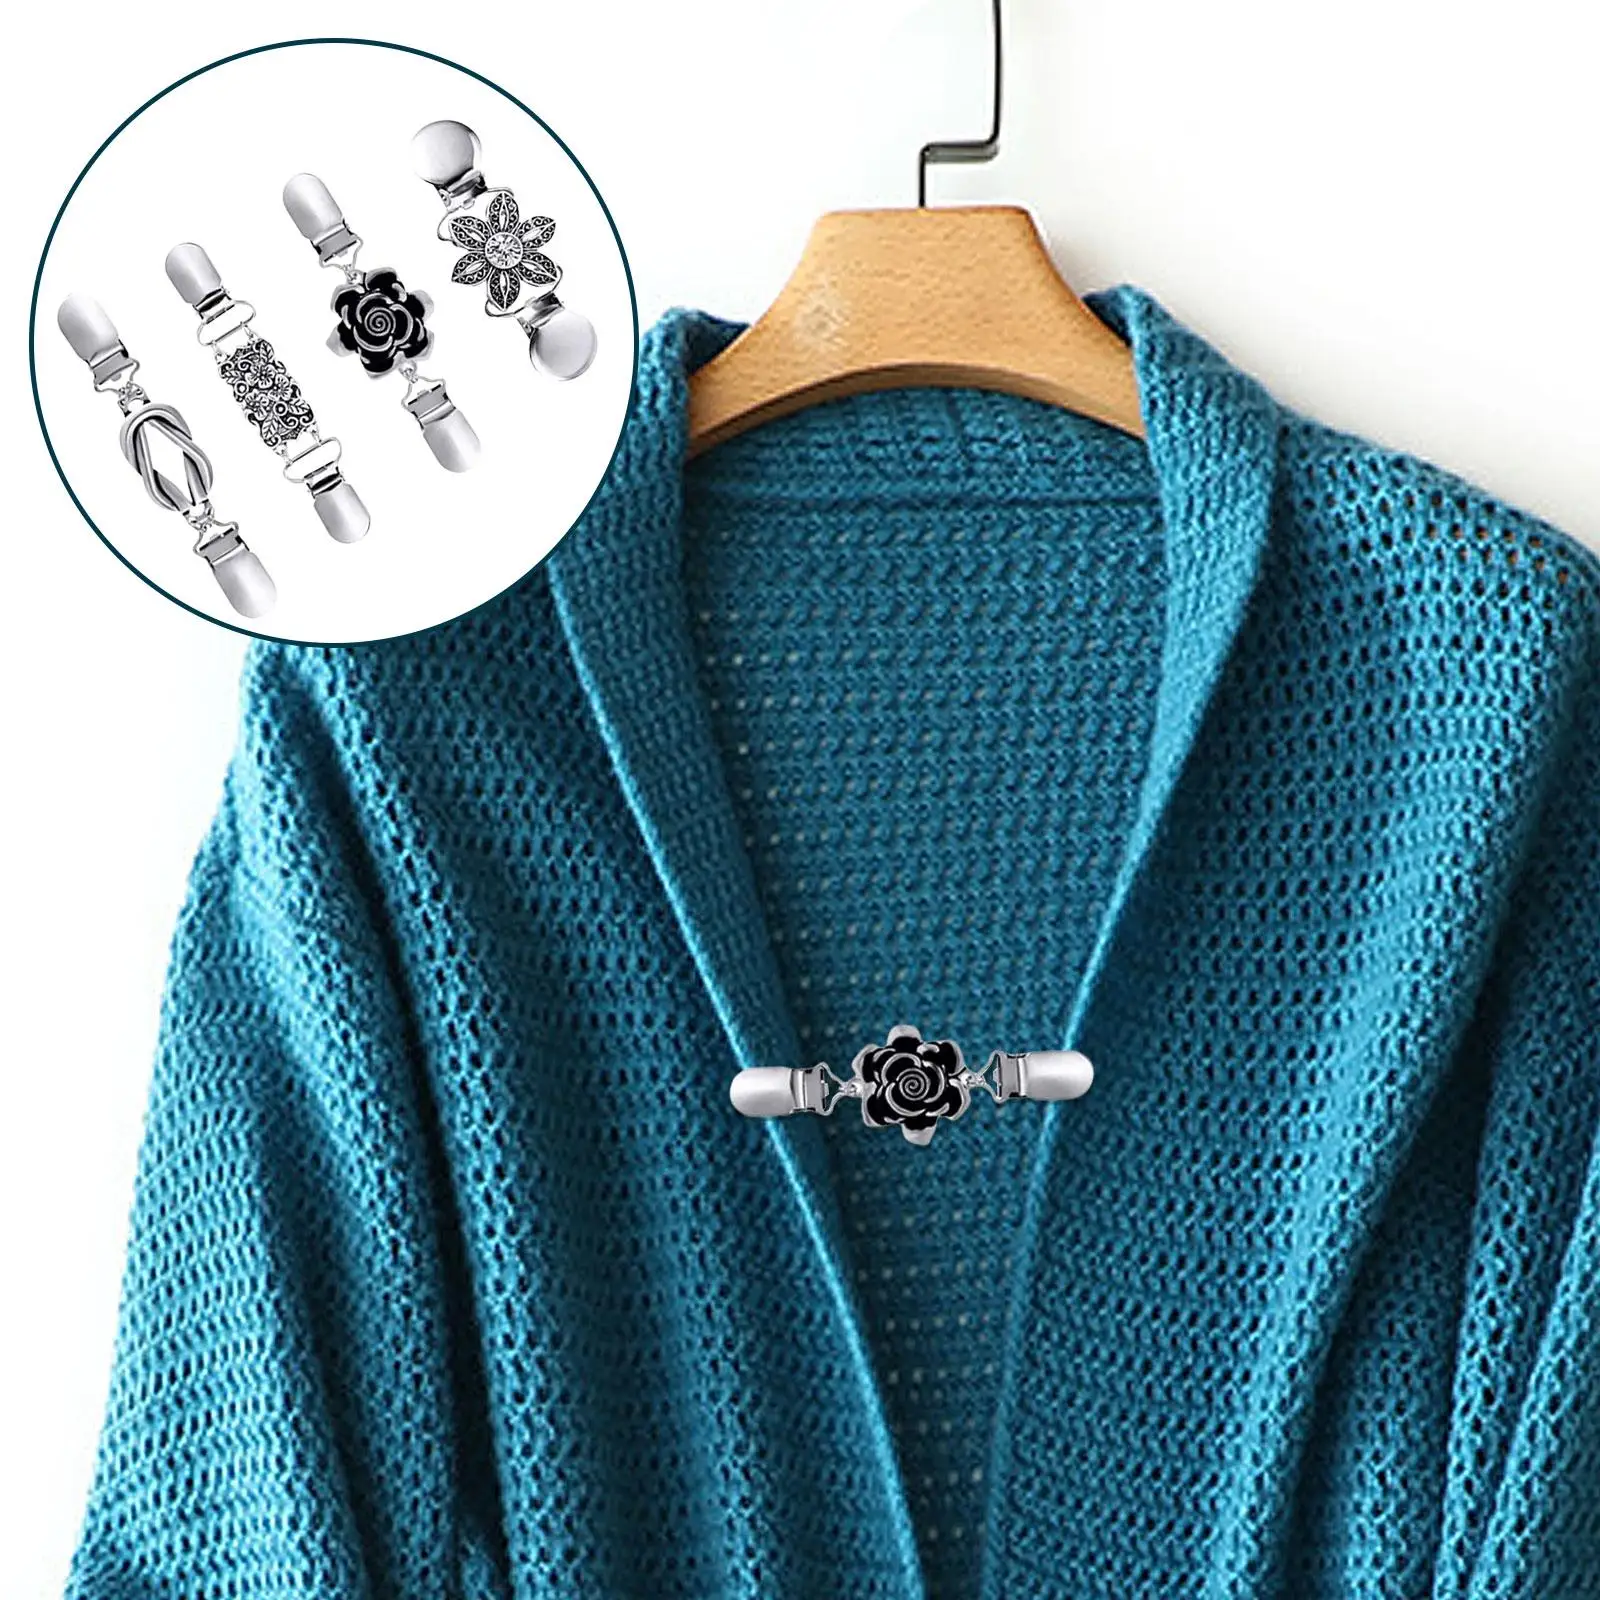 4x Retro Style Duck Clips Cardigan Holder Dresses Elegant Beaded Pearl 4 Styles for Jackets Clothes Female Dress T-Shirt Scarf